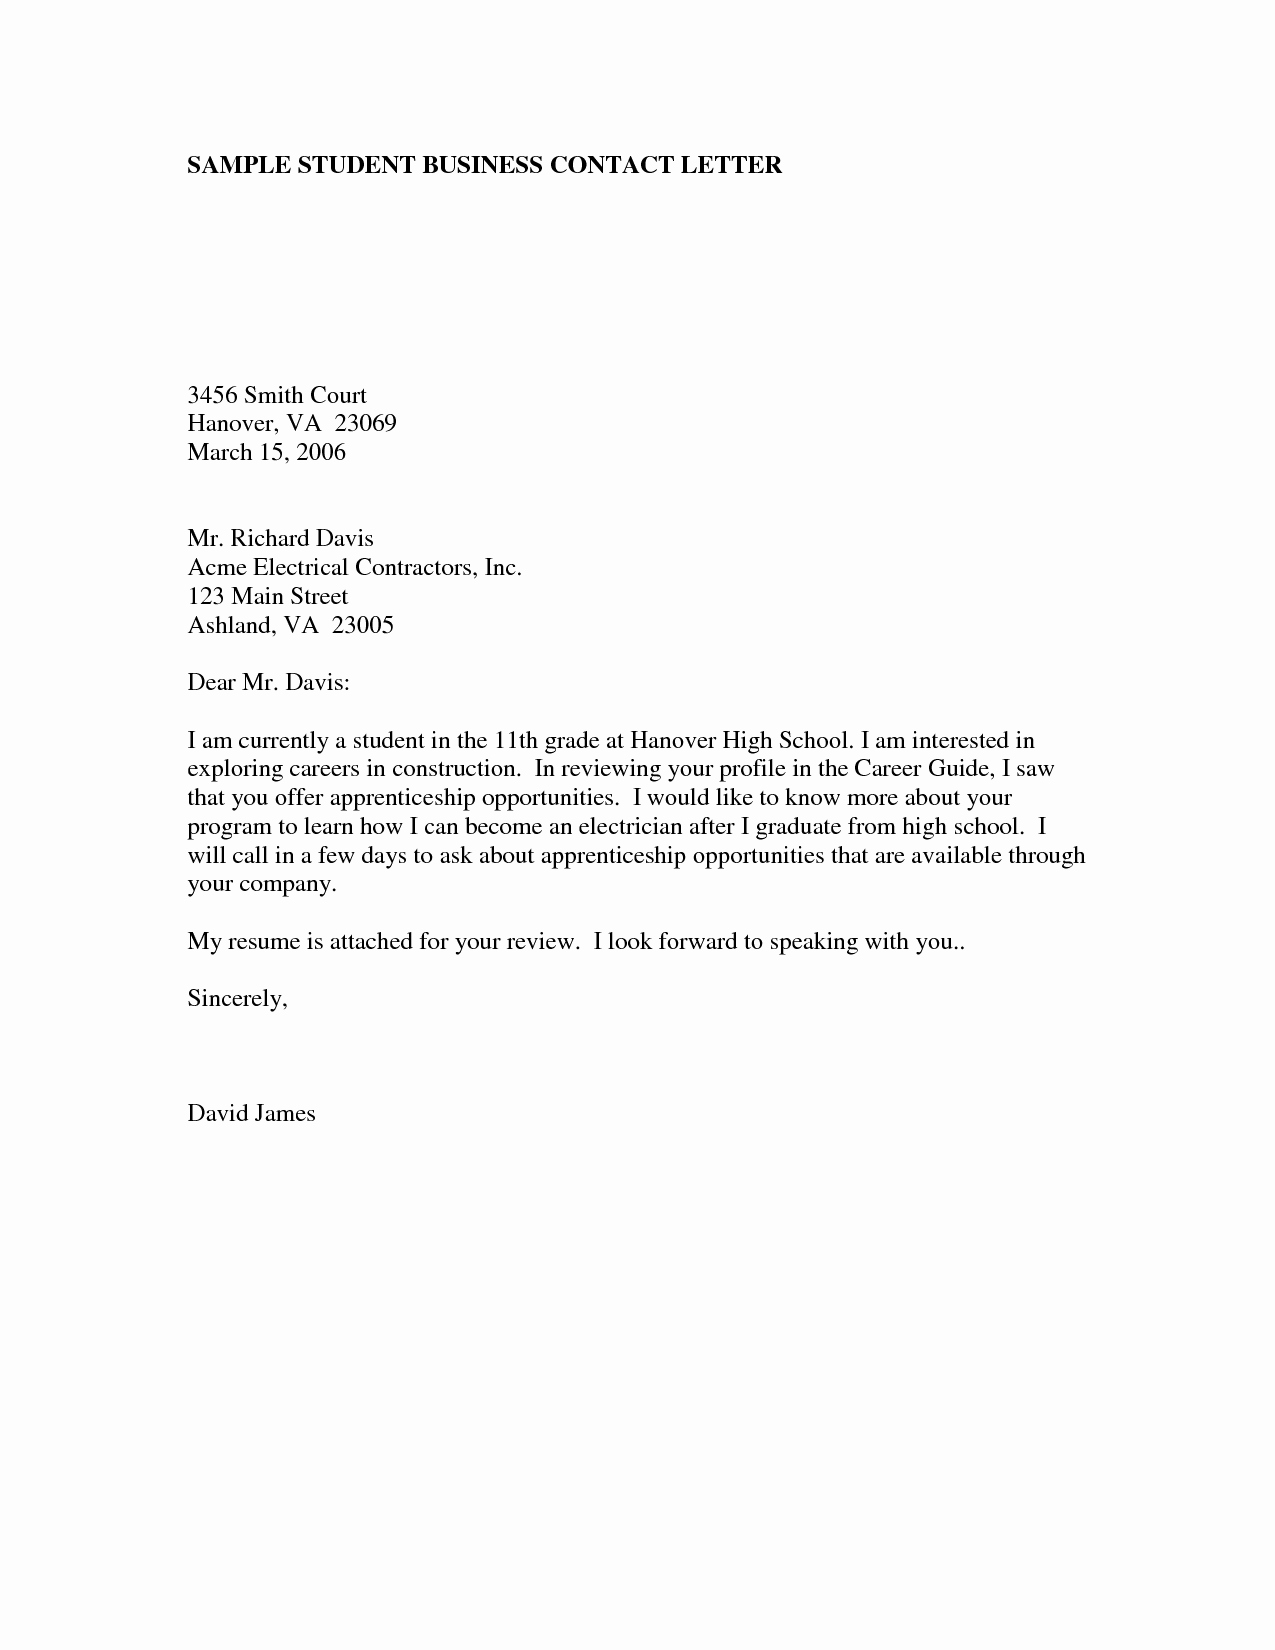 Format Of Business Letter Lovely Example Business Letter for Students